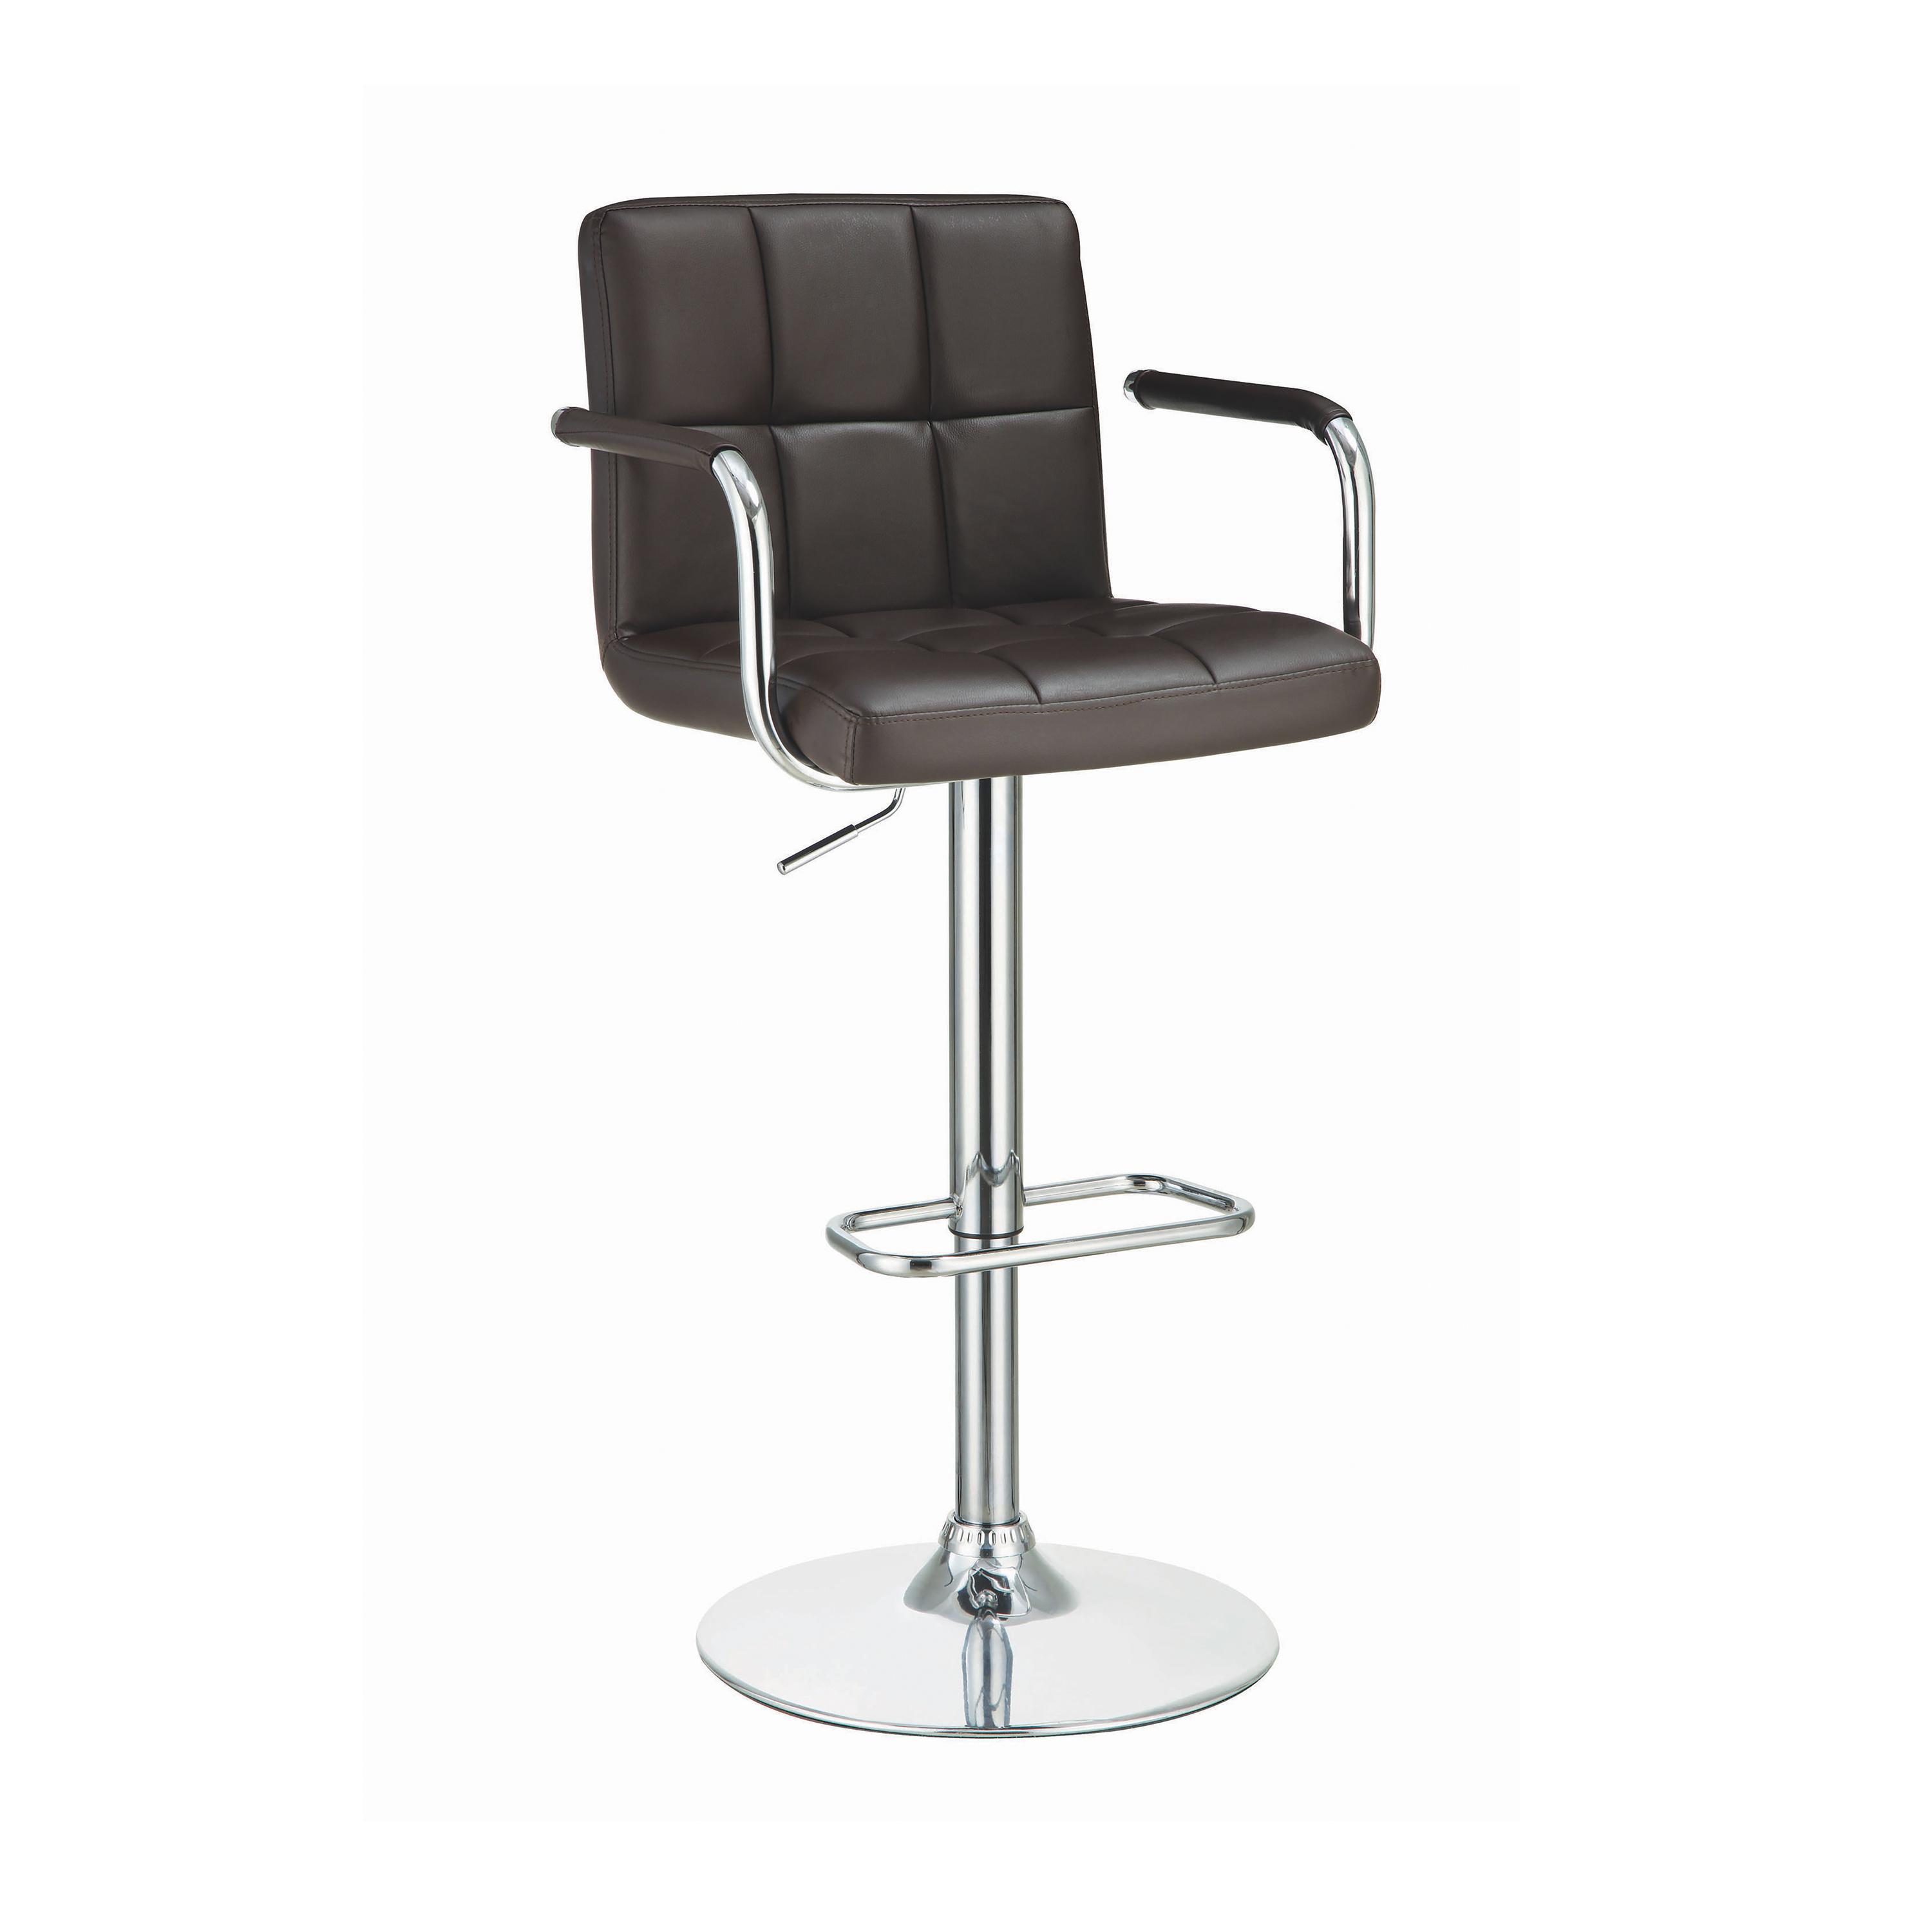 Modern Bar Stool 121099 121099 in Brown Leatherette